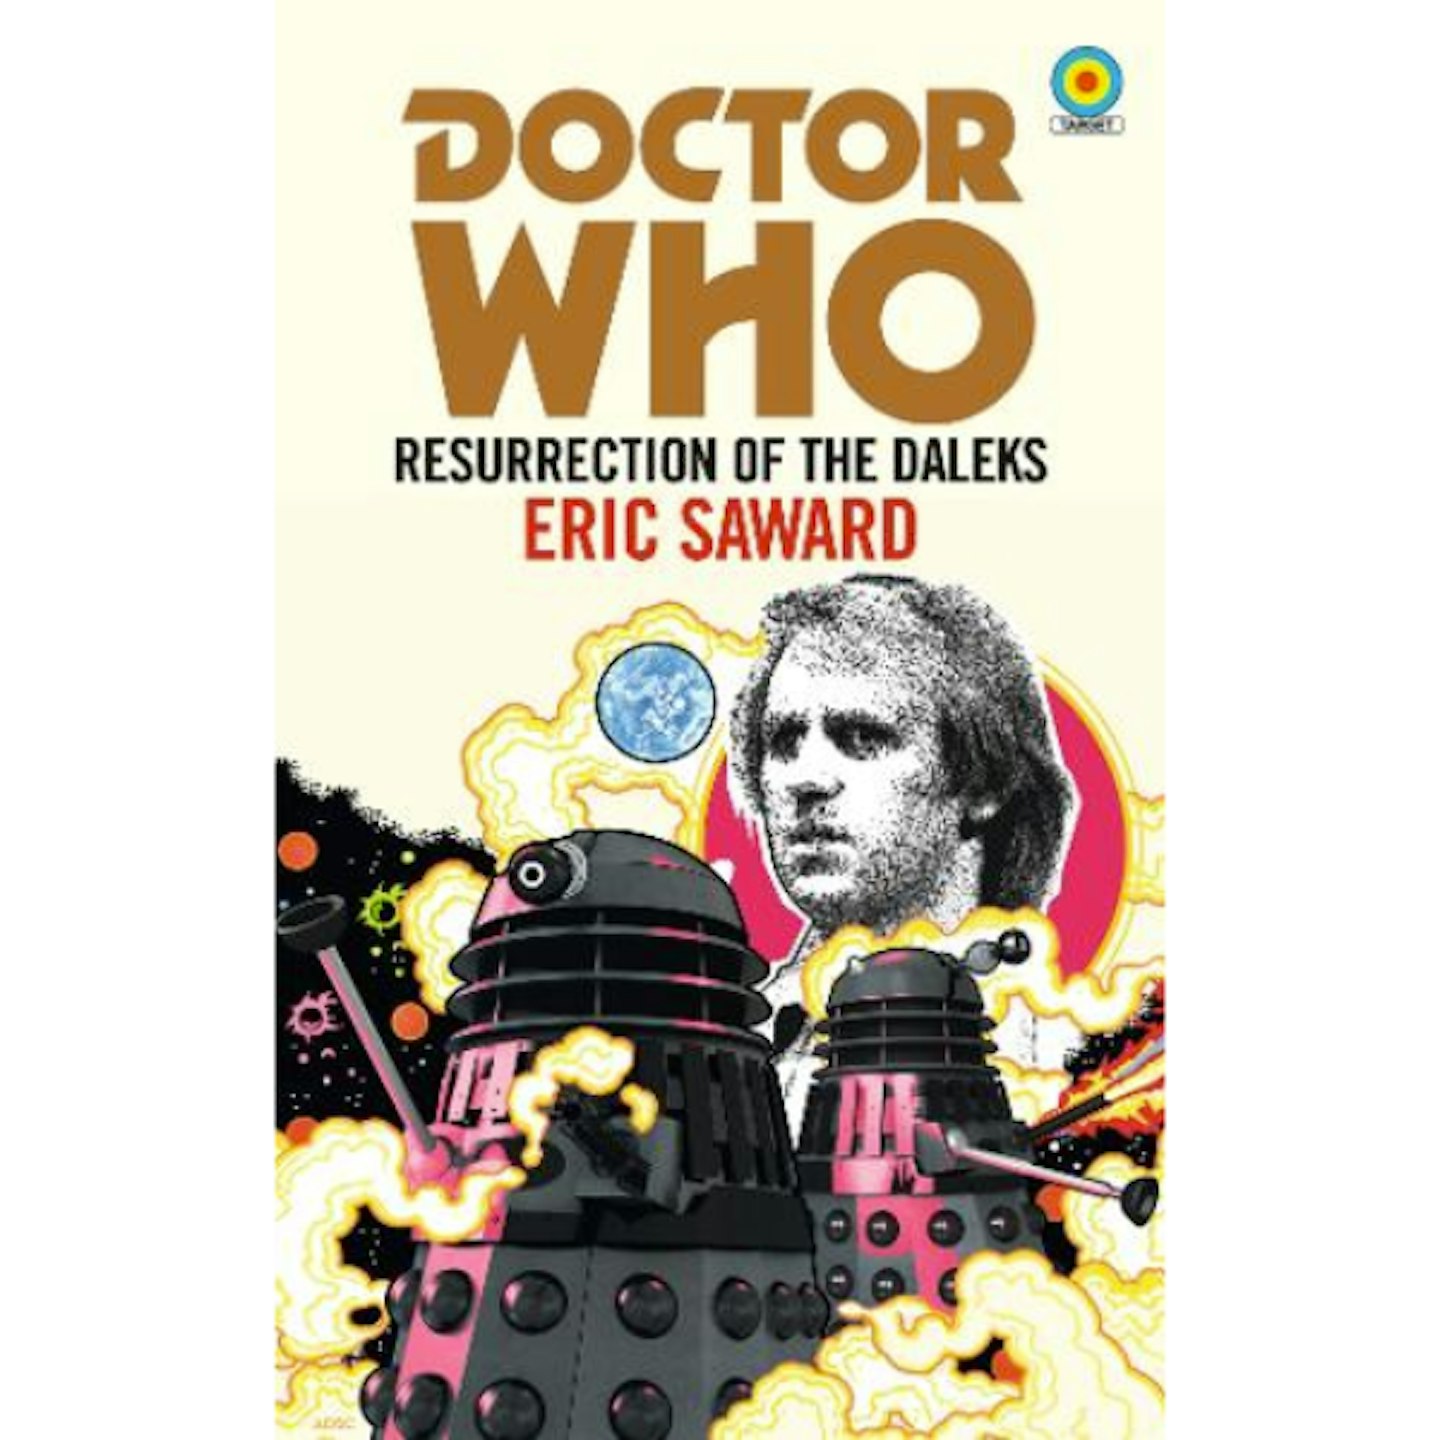 Doctor Who: Resurrection of the Darleks by Eric Saward